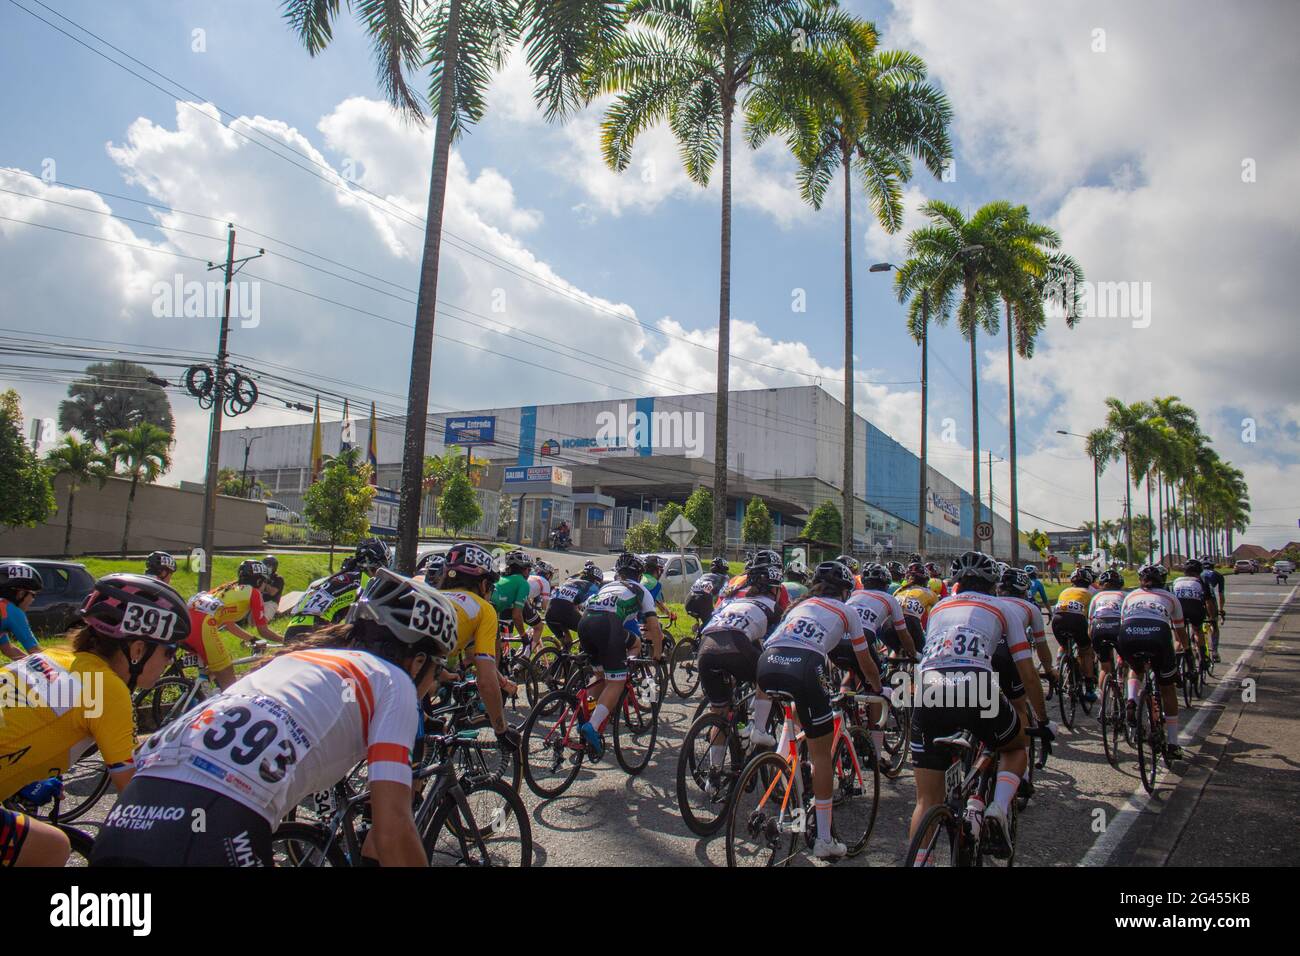 Pereira, Colombia. 18th June, 2021. Cyclists start the Women's Colombian National Road Race Championship in the streets de Pereira, Colombia on June 18, 2021 Credit: Long Visual Press/Alamy Live News Stock Photo